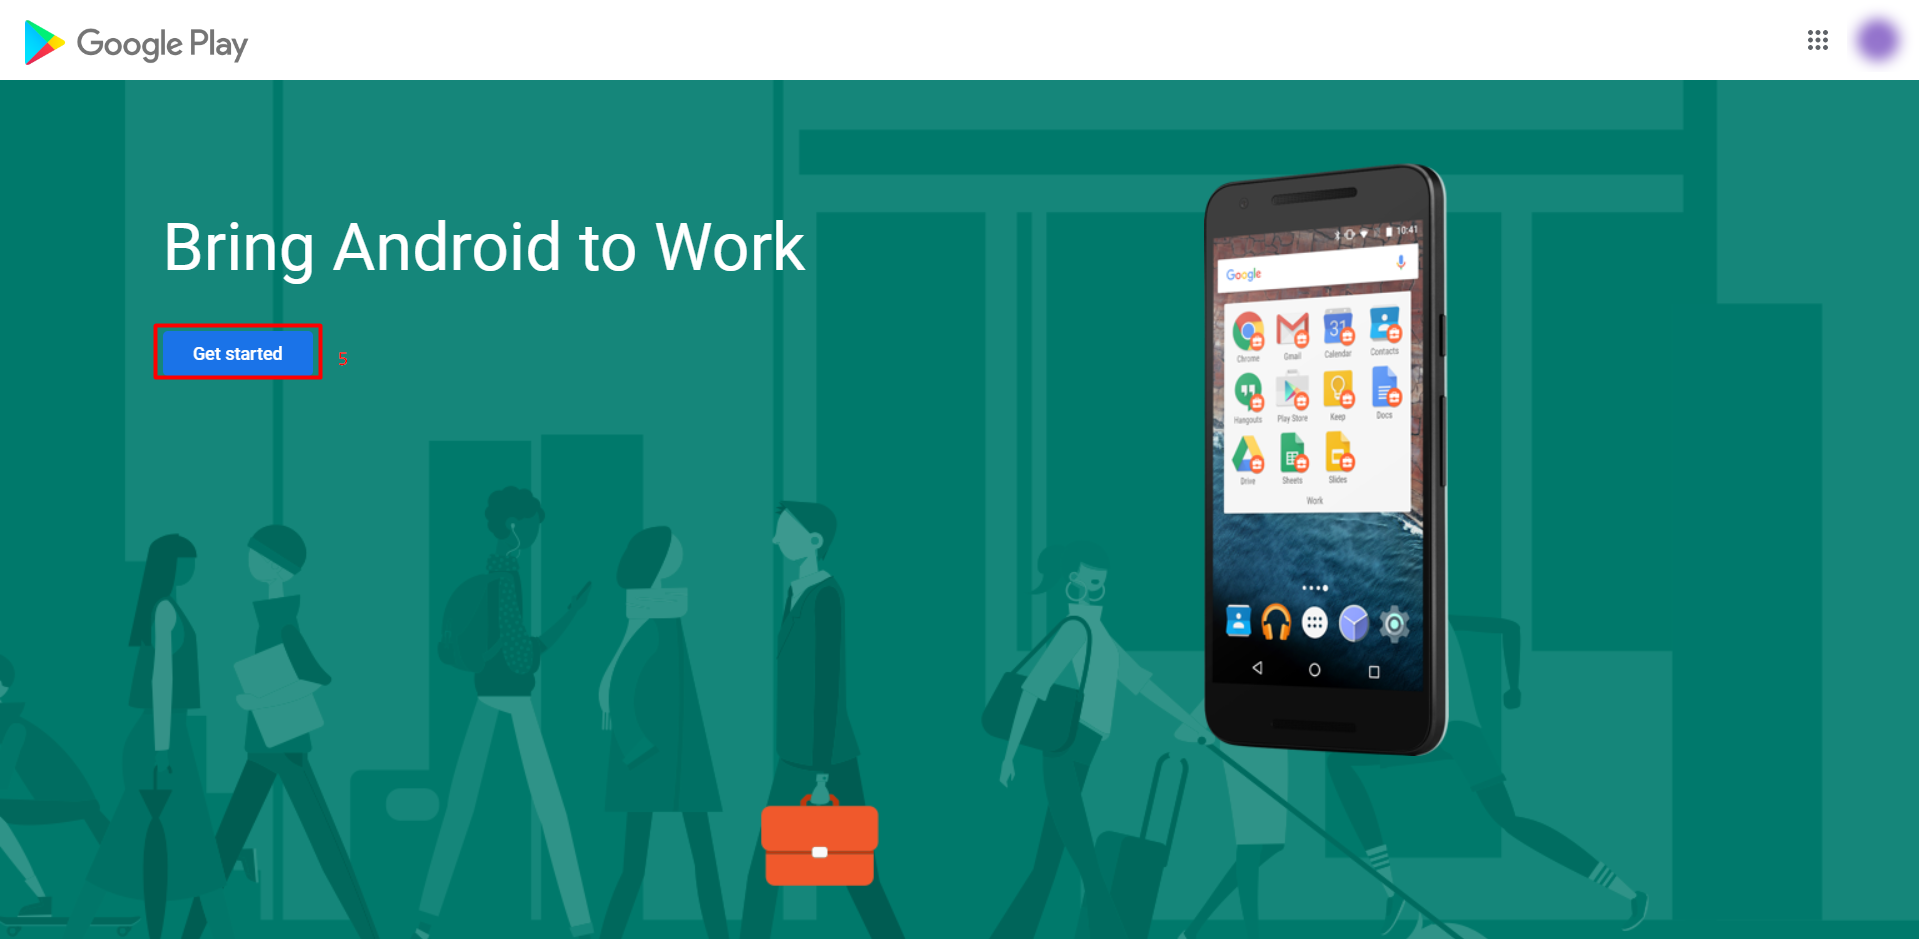 Bring Android to work